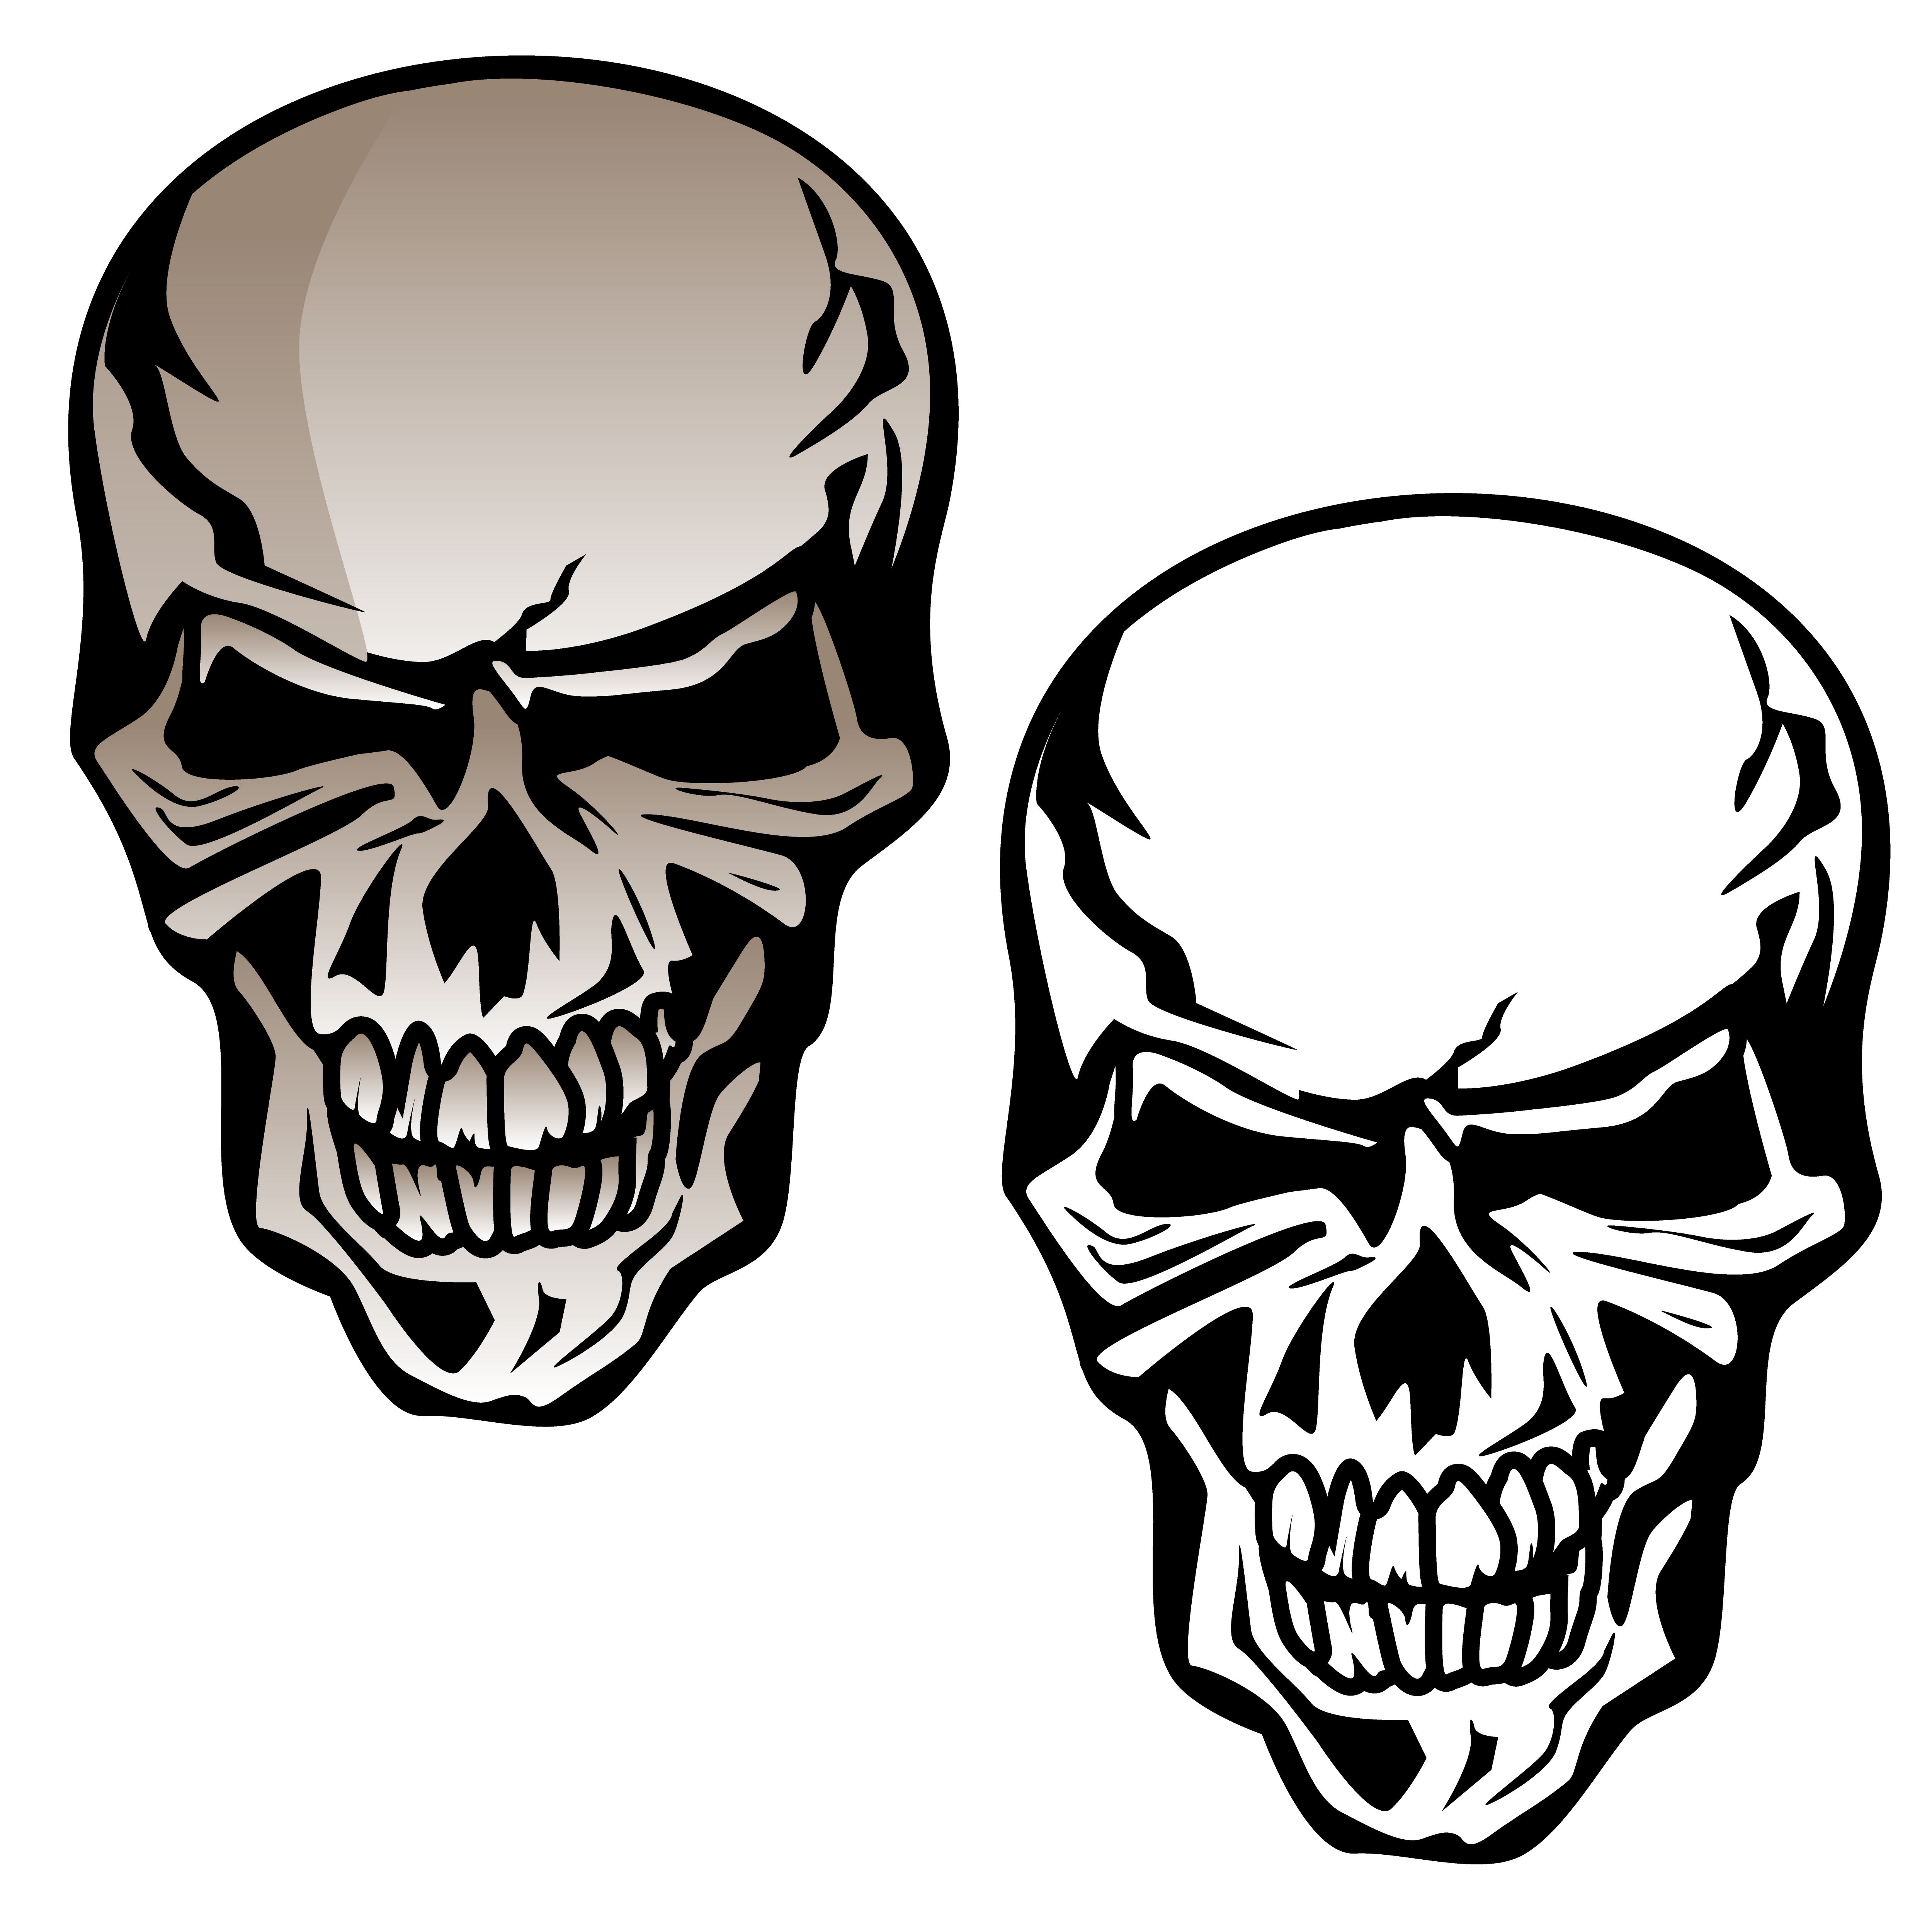 Download Human Skull Isolated Vector Illustration - Download Free ...